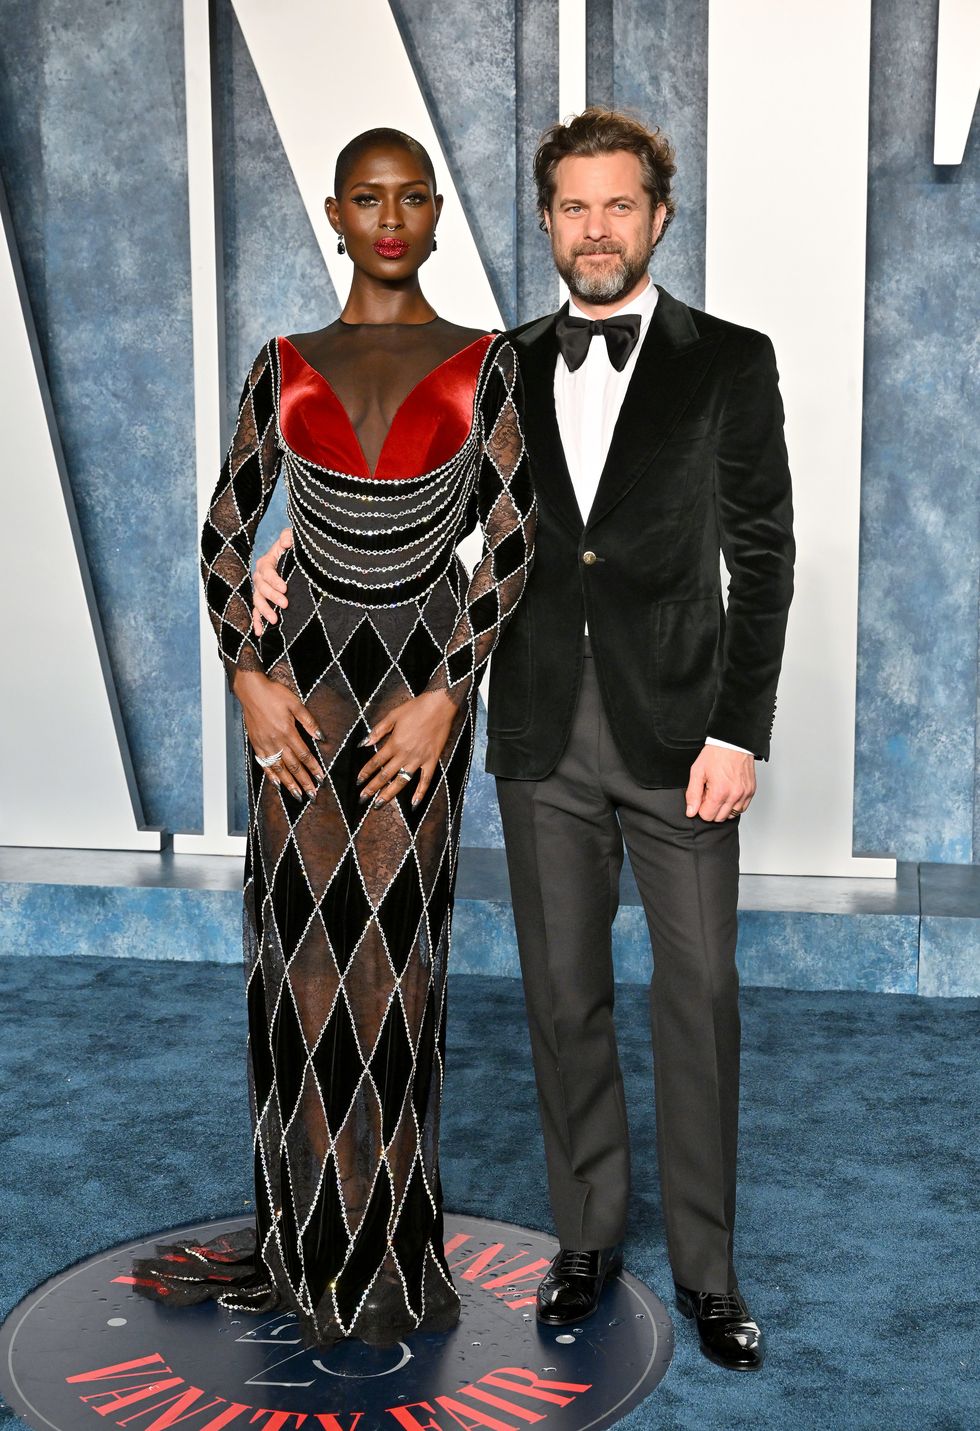 beverly hills, california march 12 jodie turner smith and joshua jackson attend the 2023 vanity fair oscar party hosted by radhika jones at wallis annenberg center for the performing arts on march 12, 2023 in beverly hills, california photo by axellebauer griffinfilmmagic